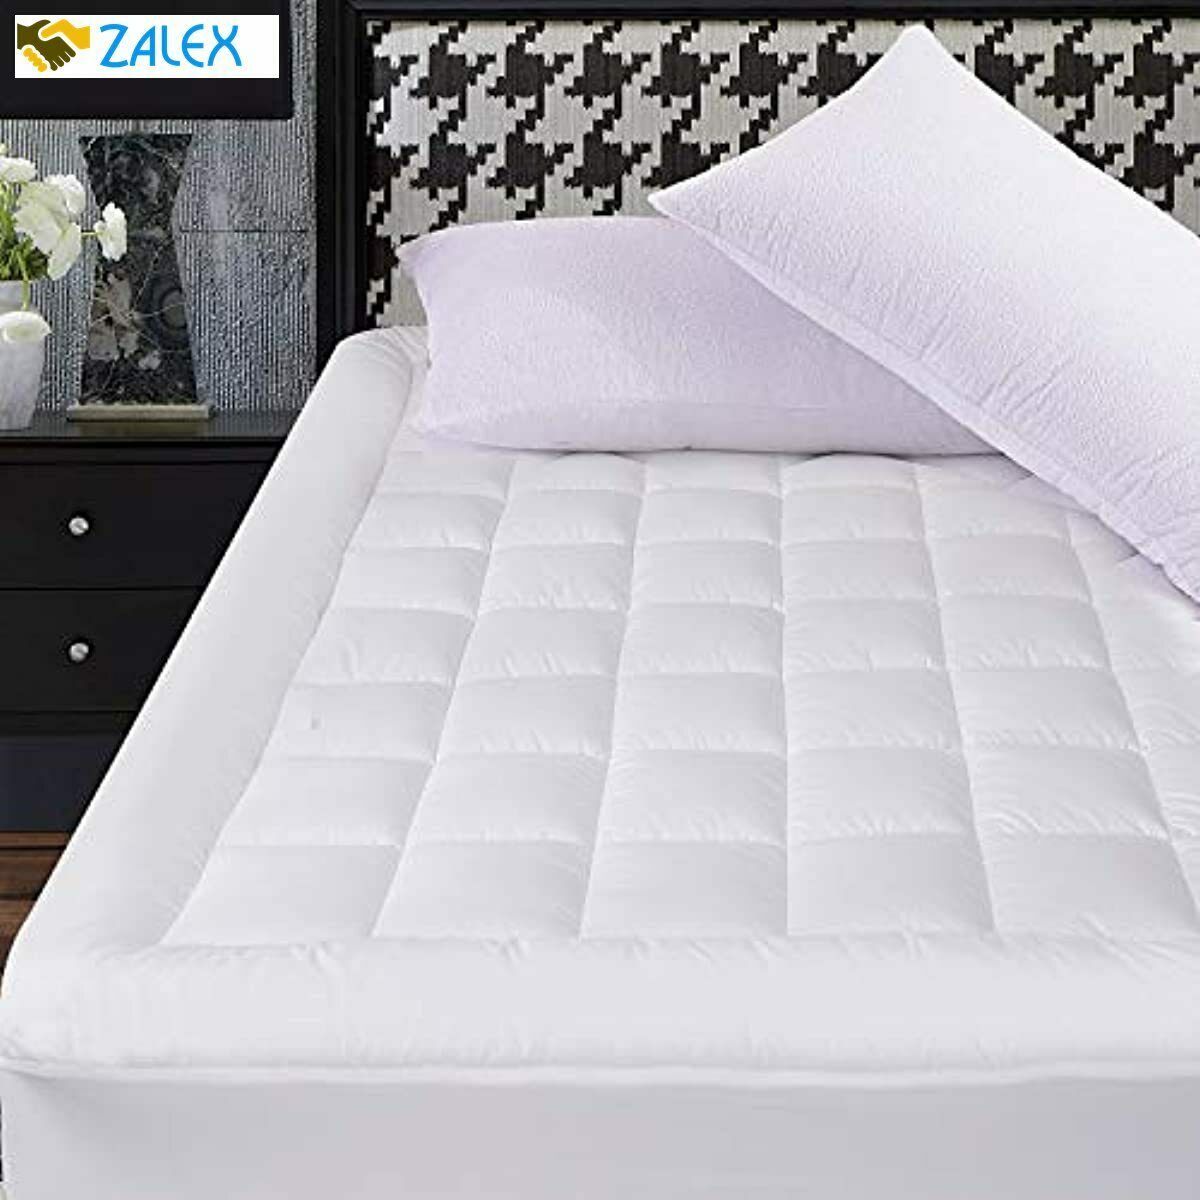 OBOEY Queen Size Mattress Pad Cover Cotton Breathable Top ...